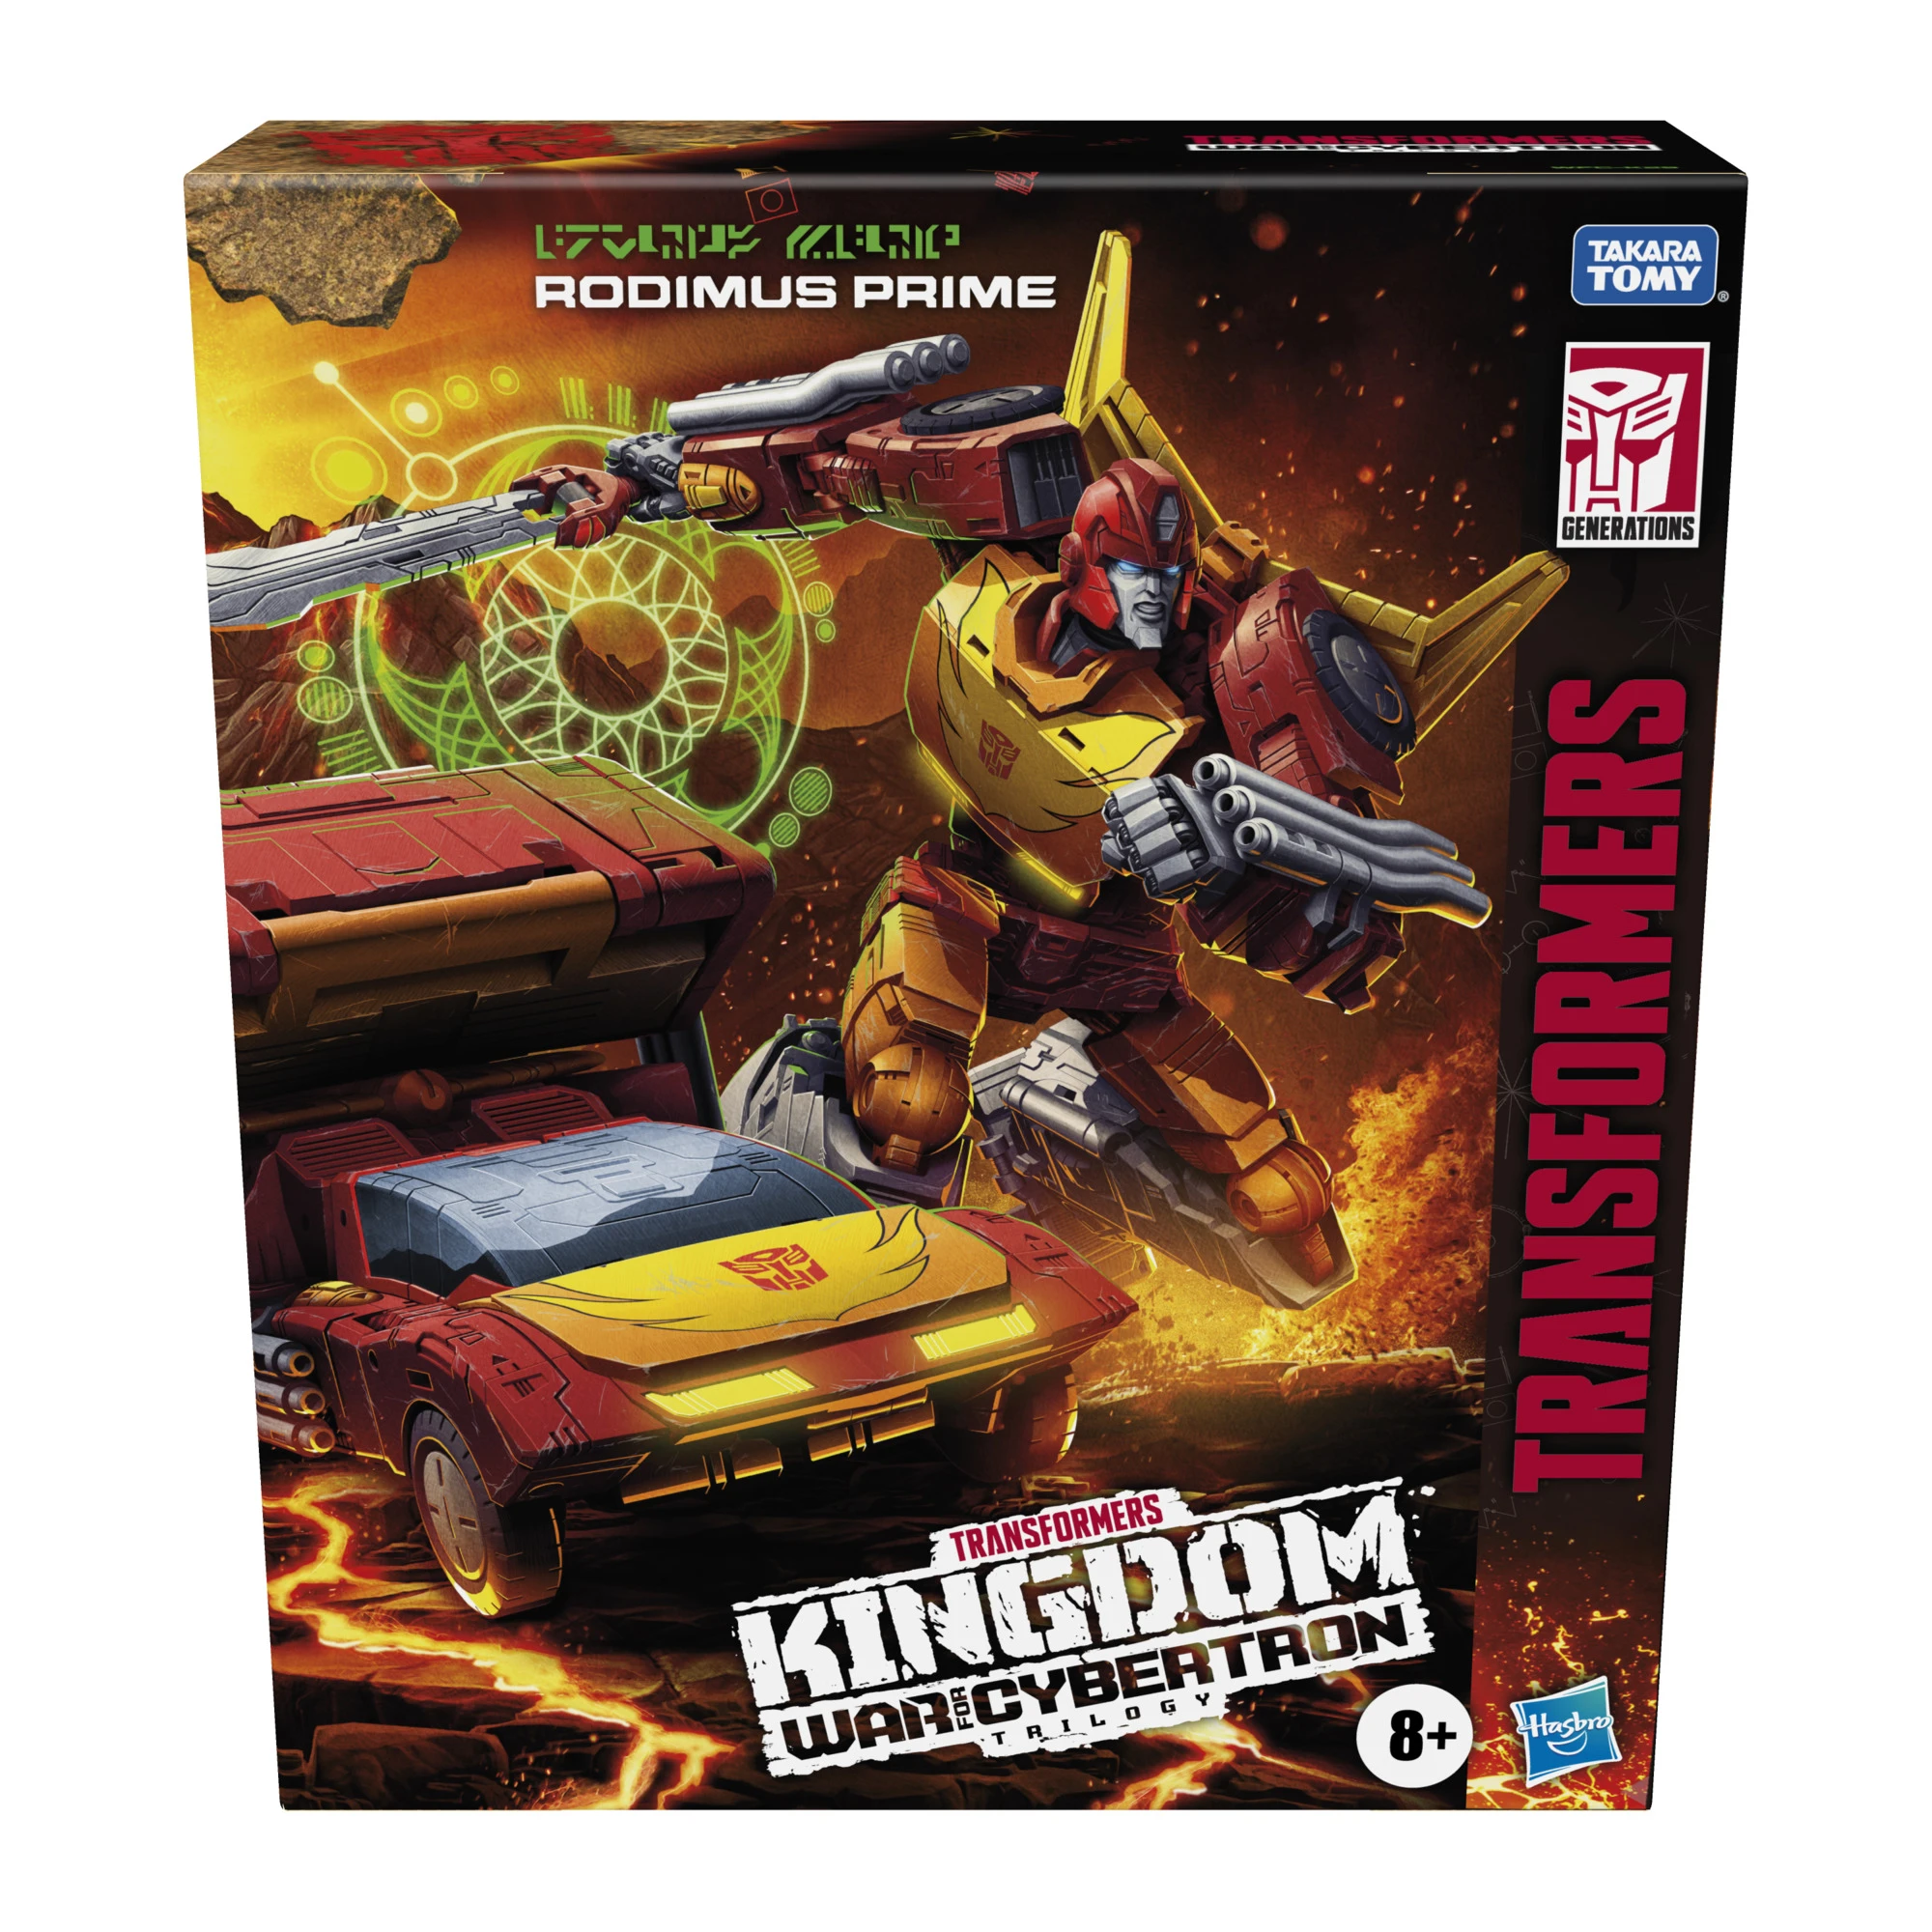 Transformers News: Transformers Kingdom Wave 3 Preorder Listings on Amazon and Target